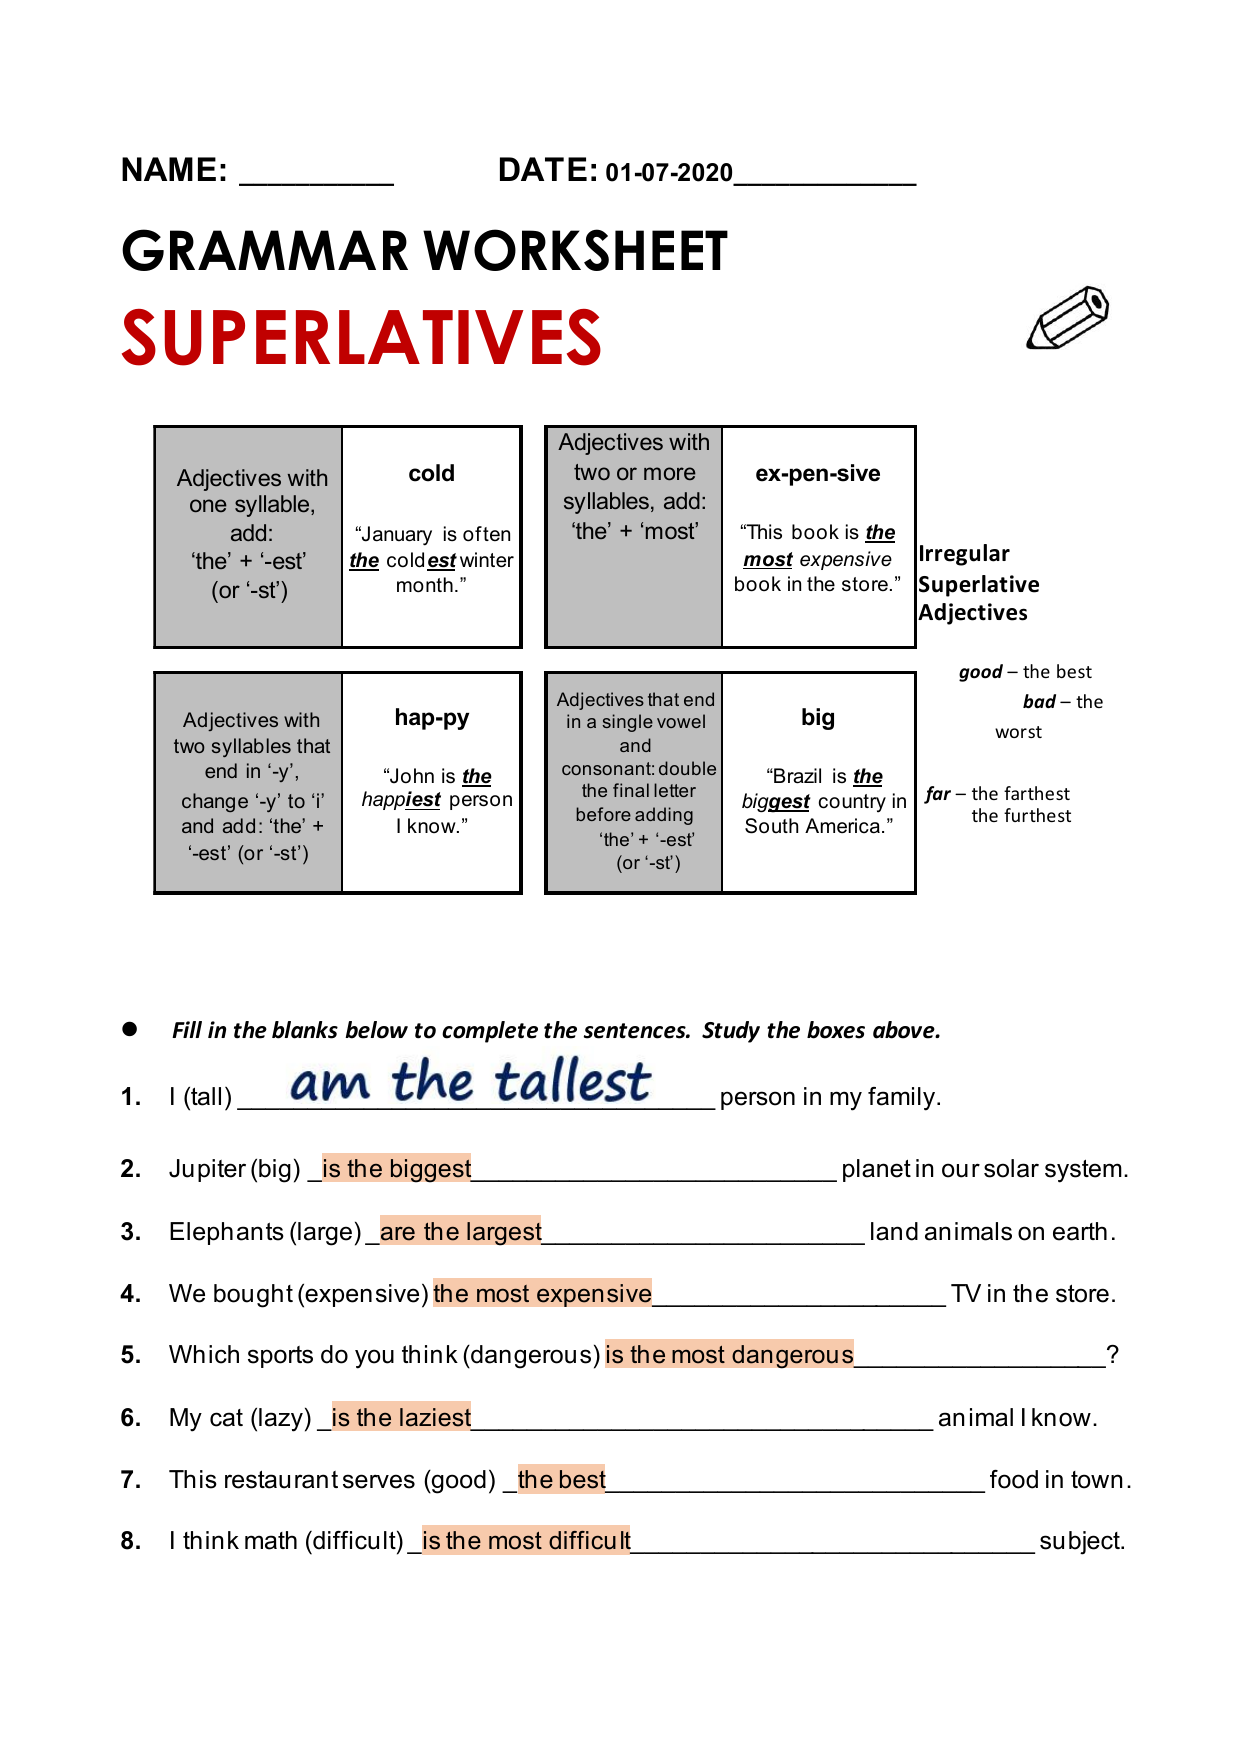 comparative-and-superlative-adverbs-worksheet-comparative-and-superlative-adverbs-superlative